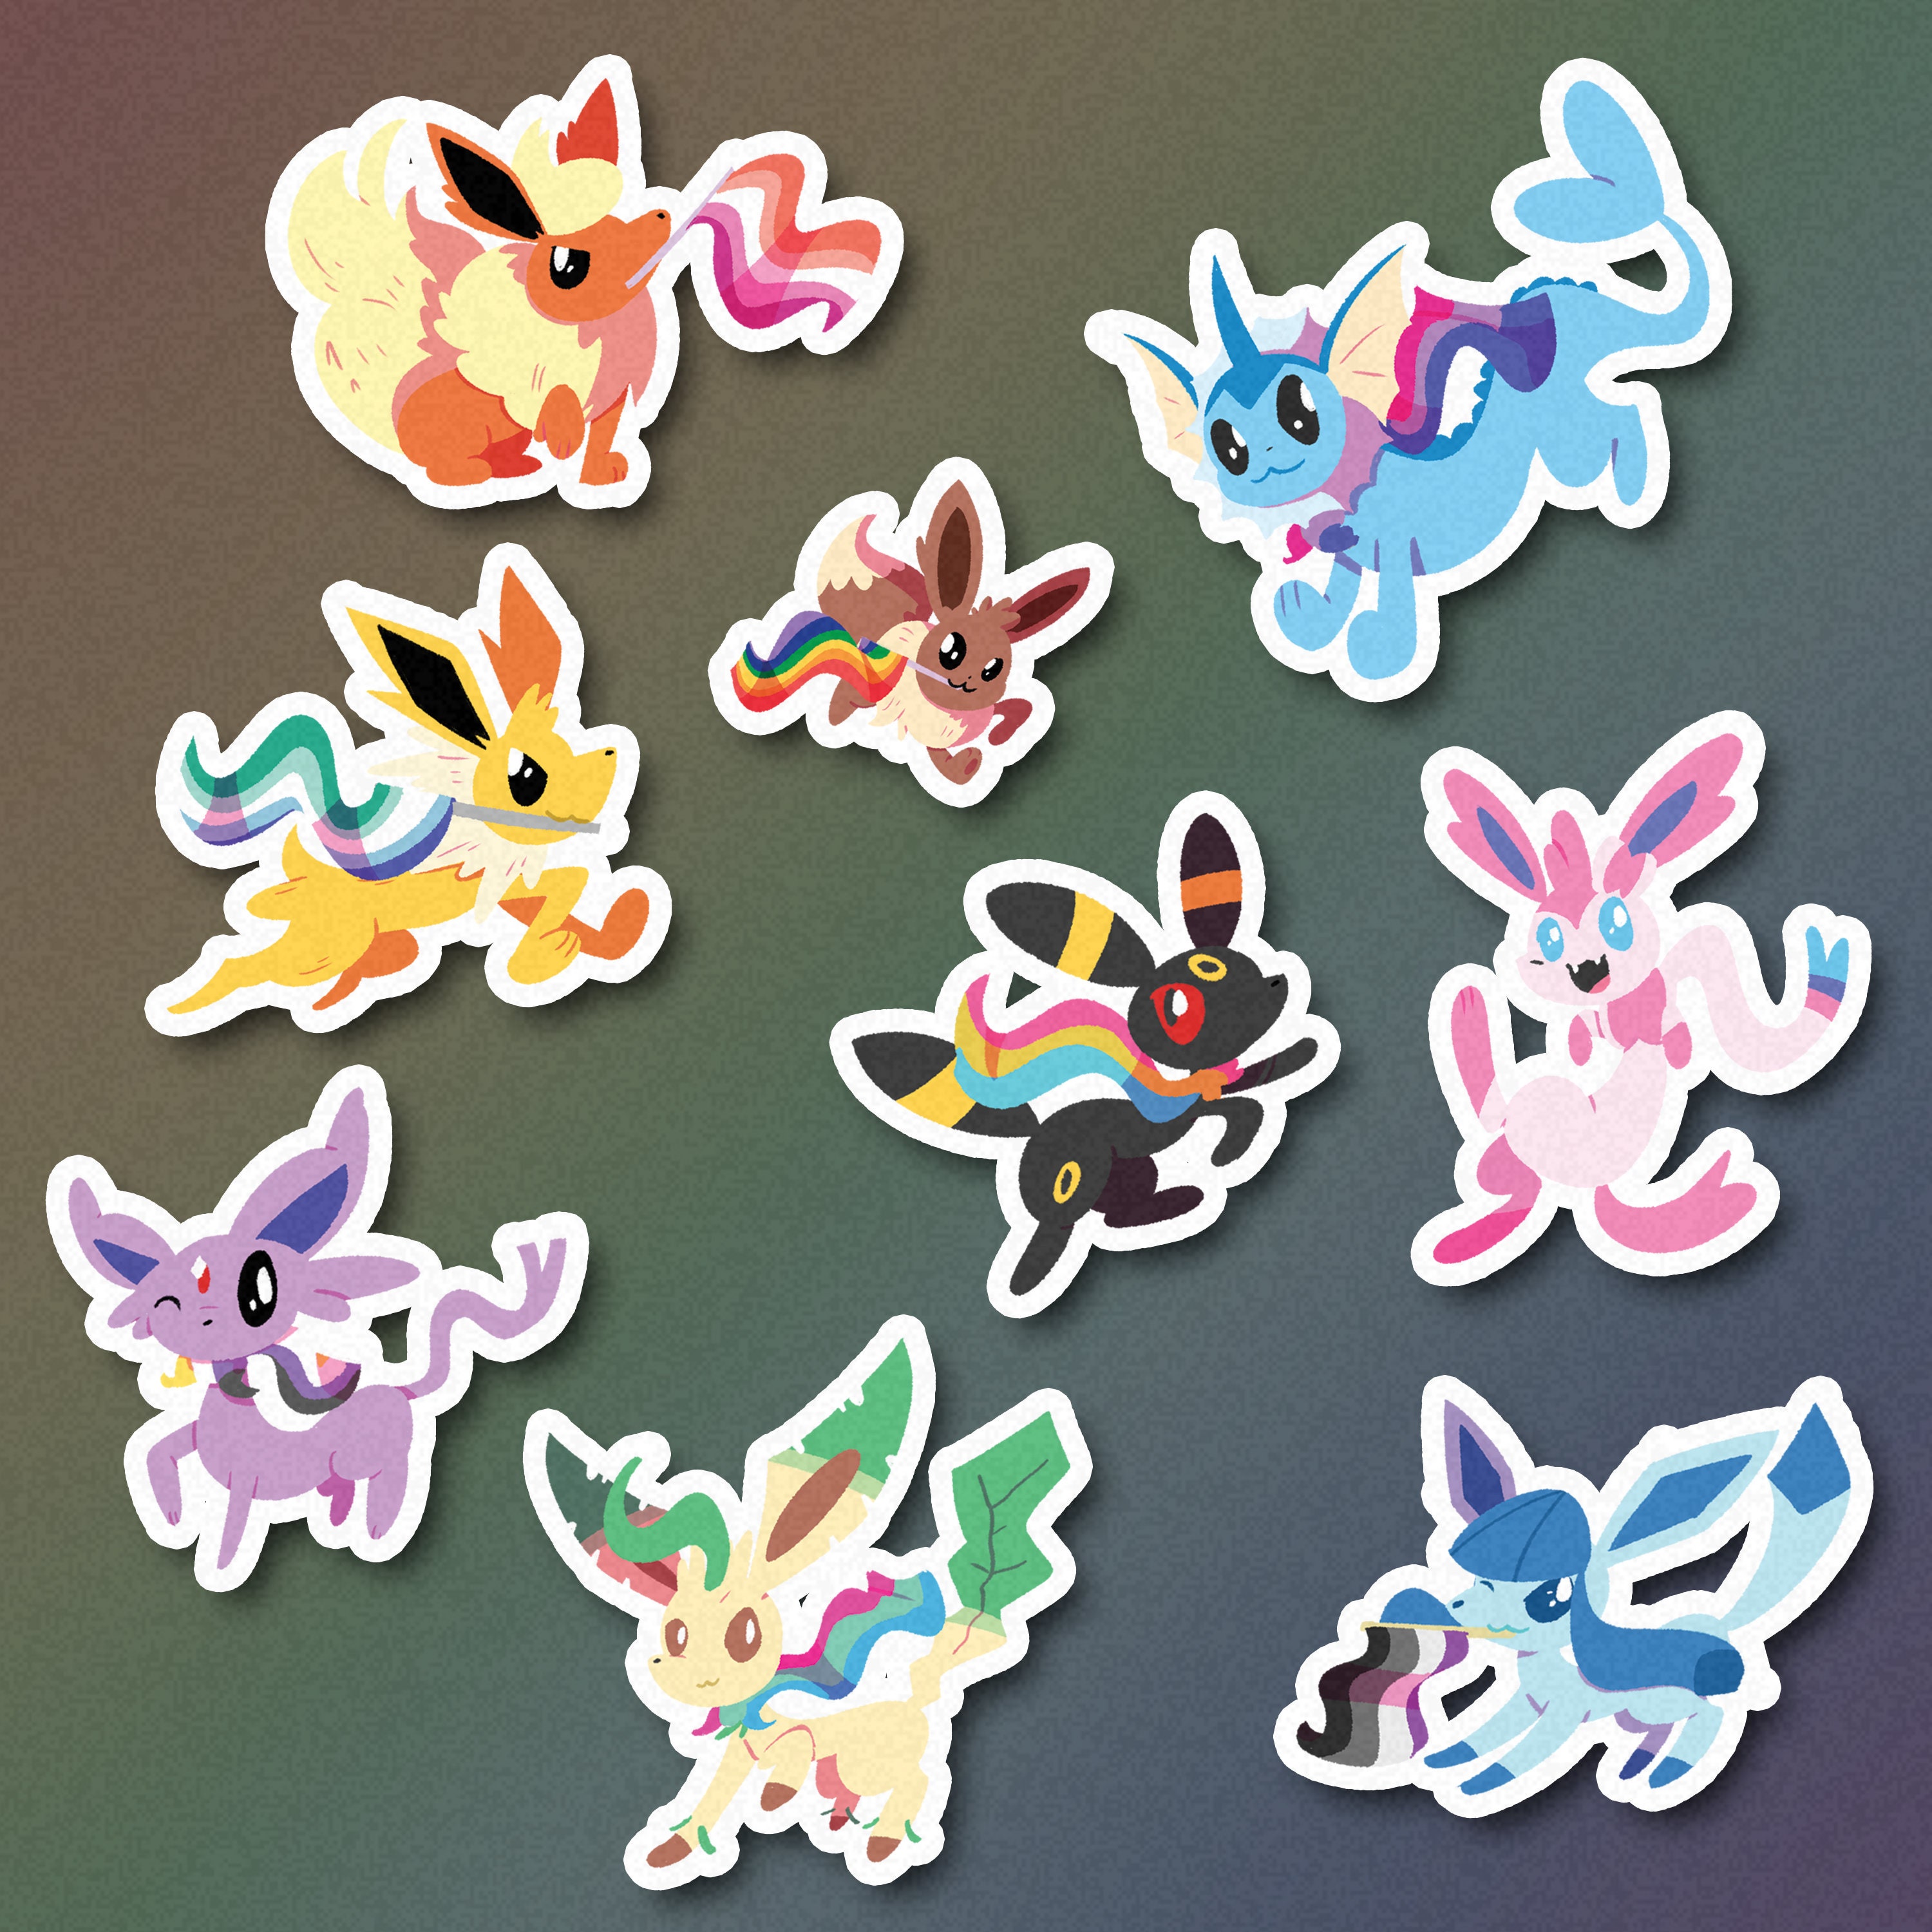 Eevee Pokemon [Possibilities Are Endless] Sticker – PPON